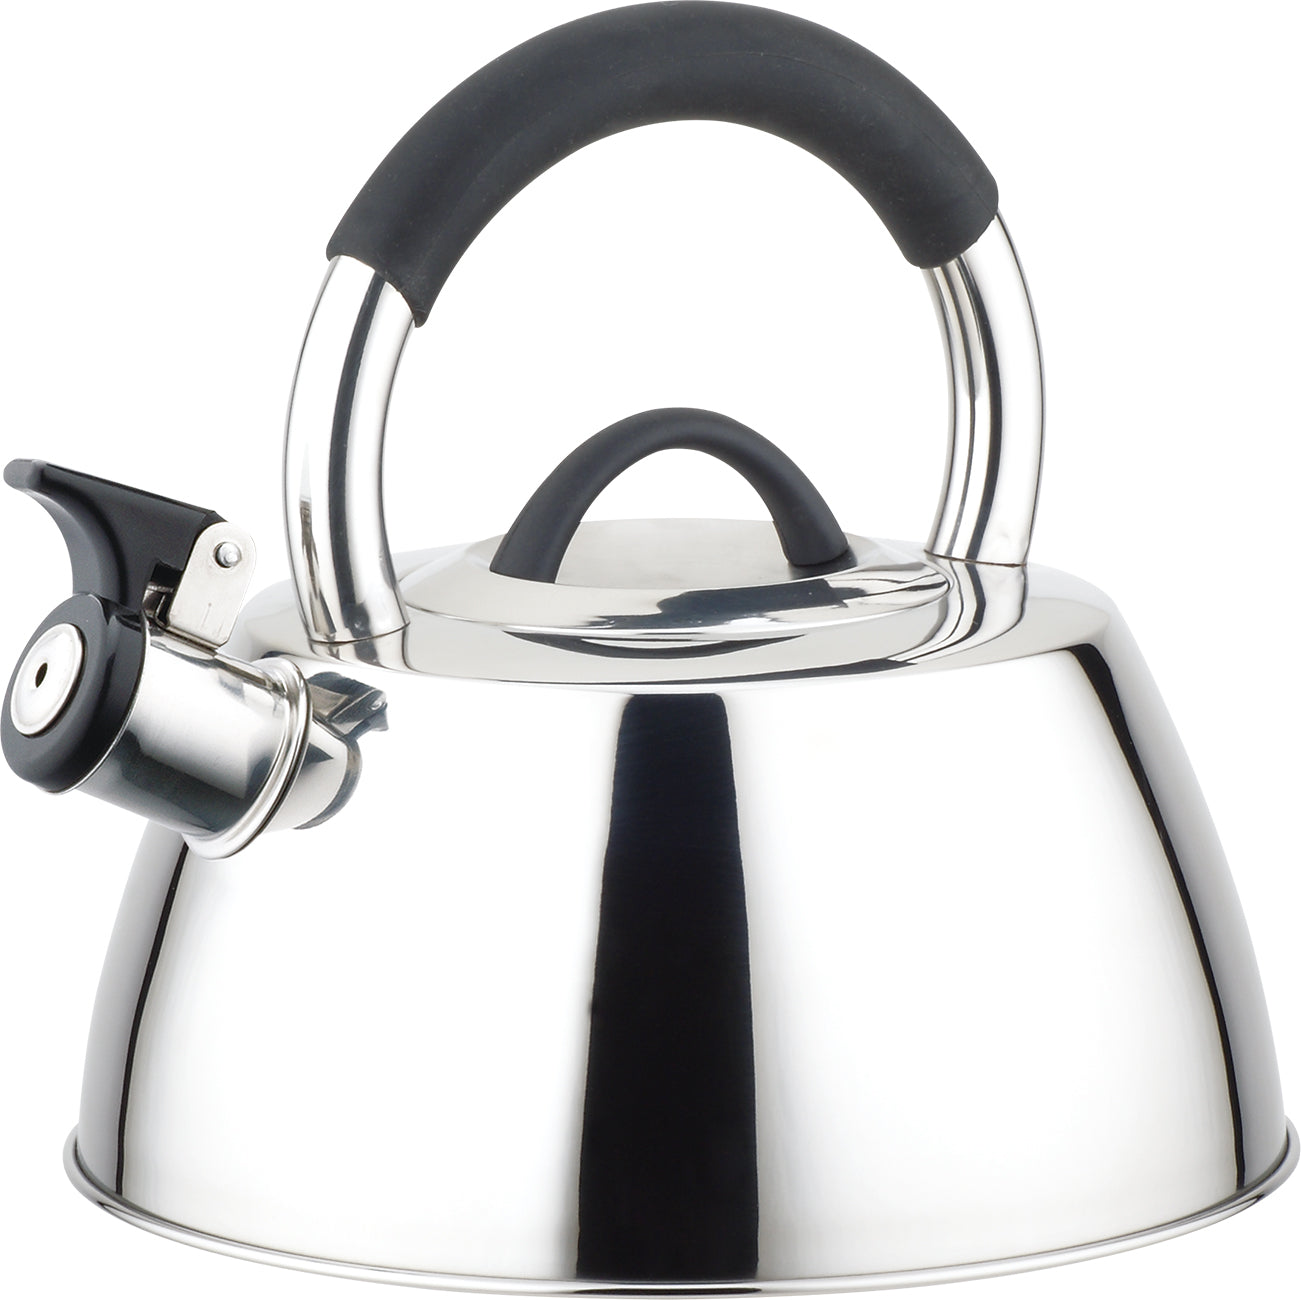 Buckingham Modern Stove Top Induction Whistling Kettle 2.6 L - stainless steel